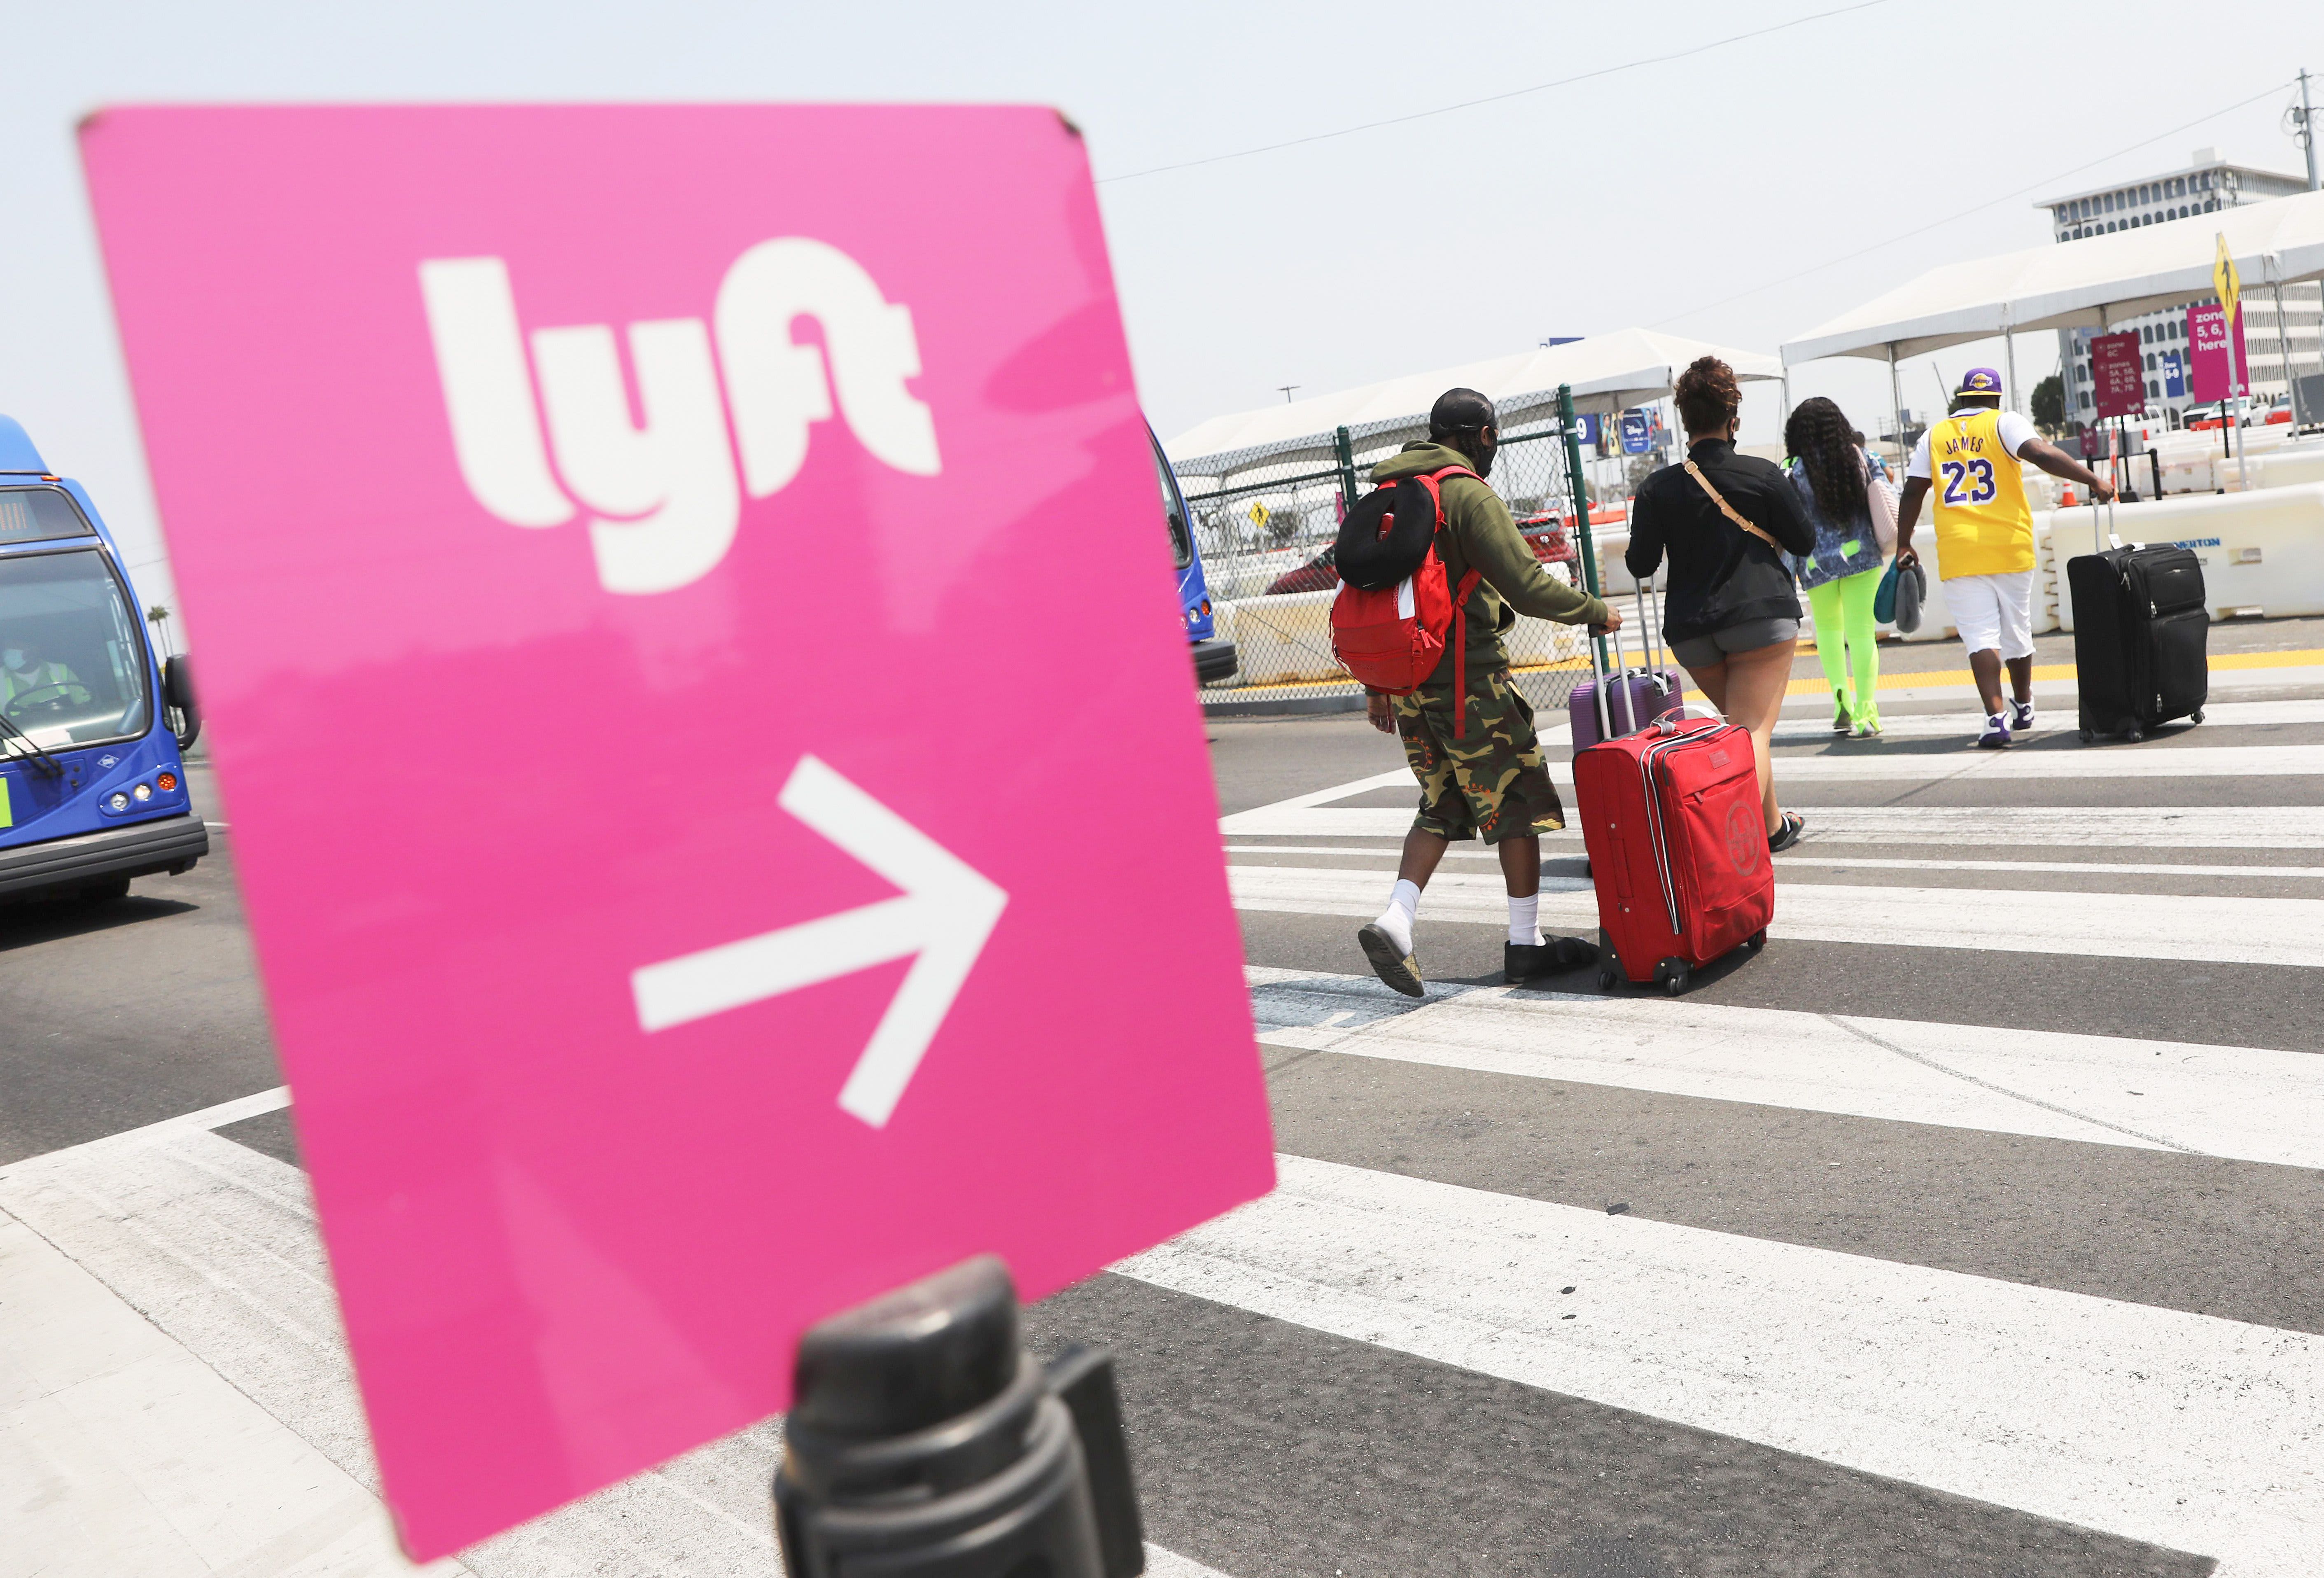 Top Wall Street analysts back stocks like Lyft and Square amid vaccine hopes